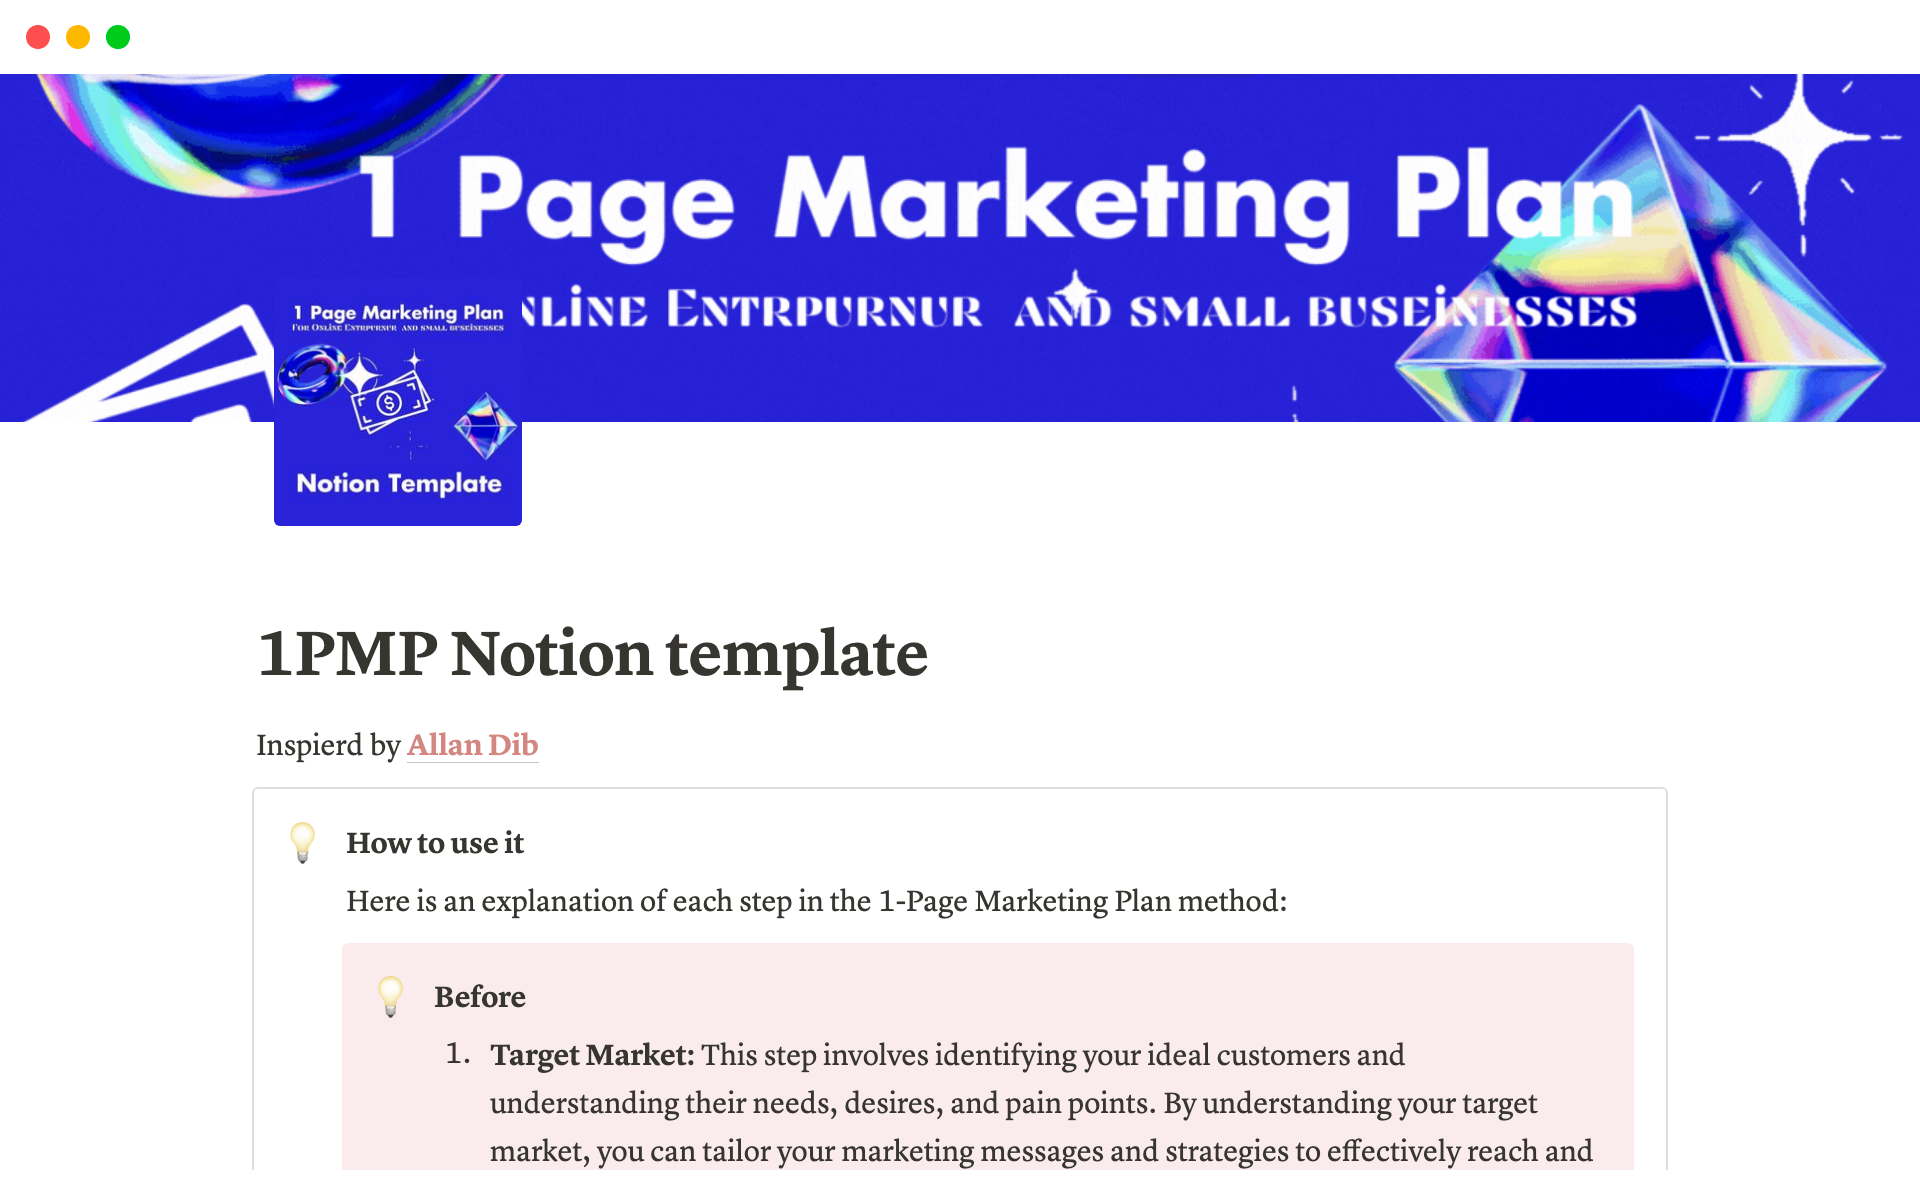 Vista previa de plantilla para MarketBoost: The Ultimate 1-Page Marketing Plan Notion Template for Small Online Businesses